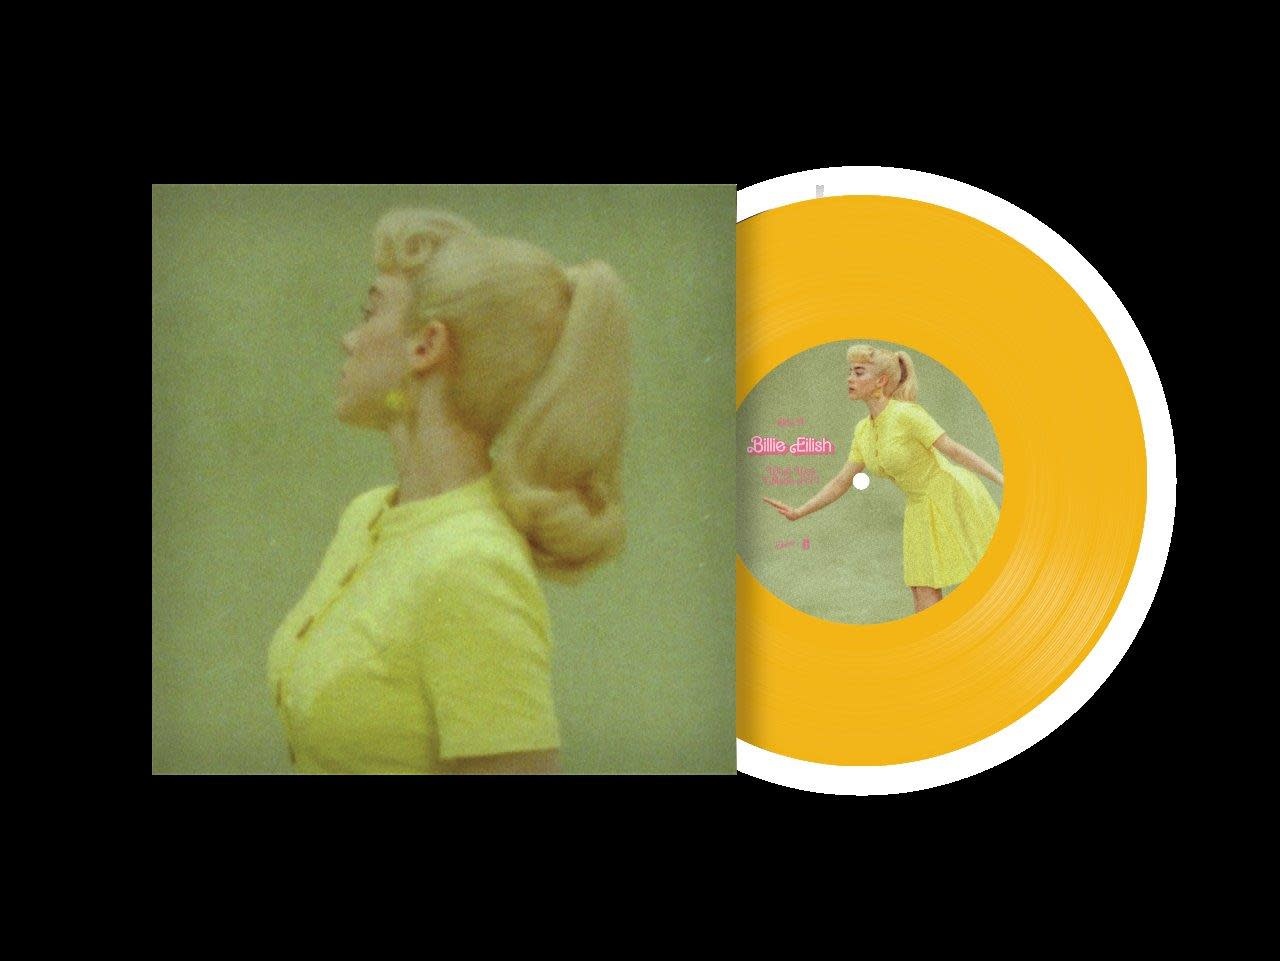 Interscope Billie Eilish - What Was I Made For? (Yellow Vinyl)